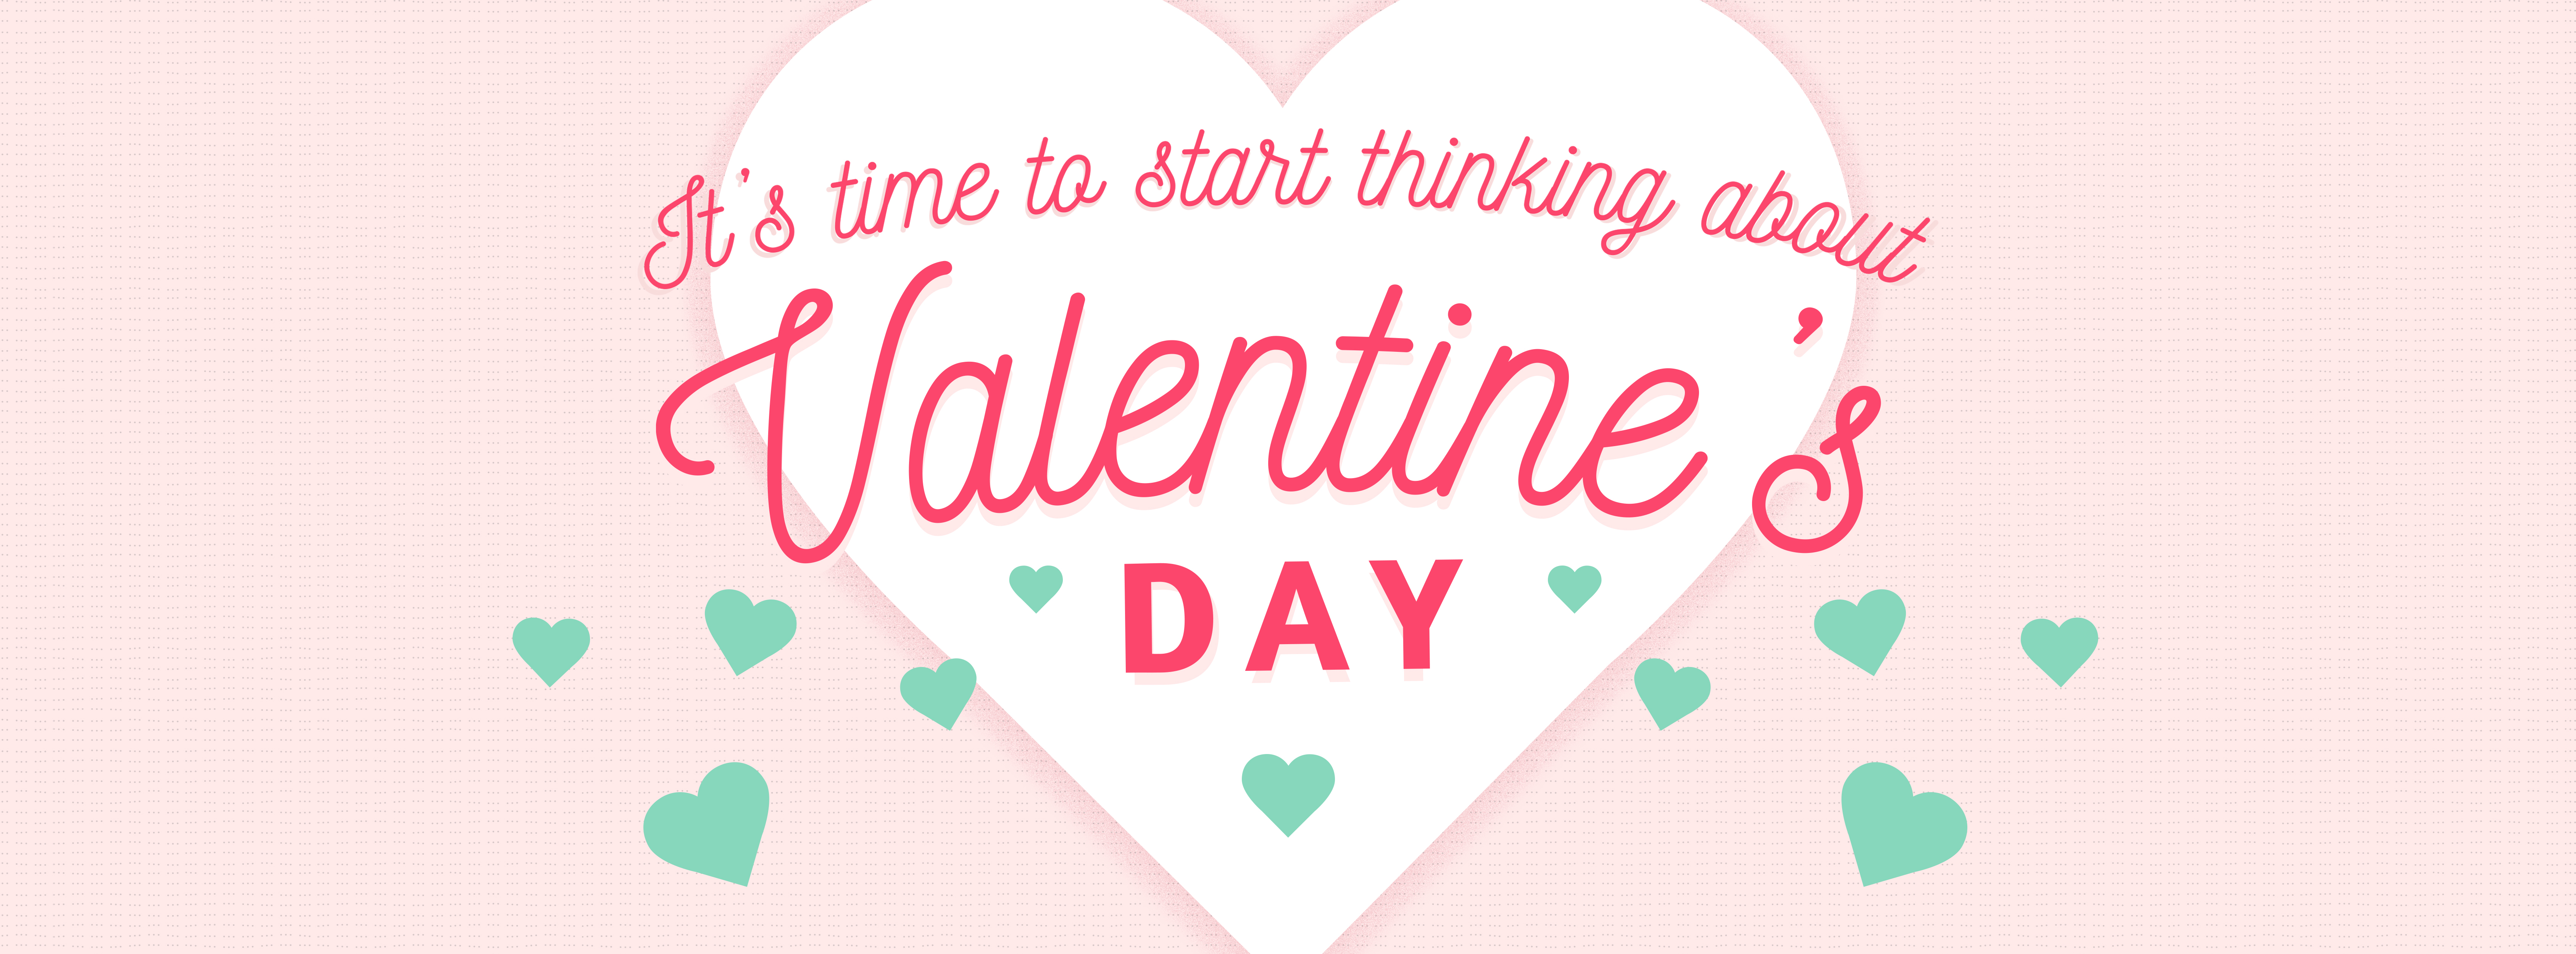 Share The Love This Year With Our Top Selling Valentine’s Day Products